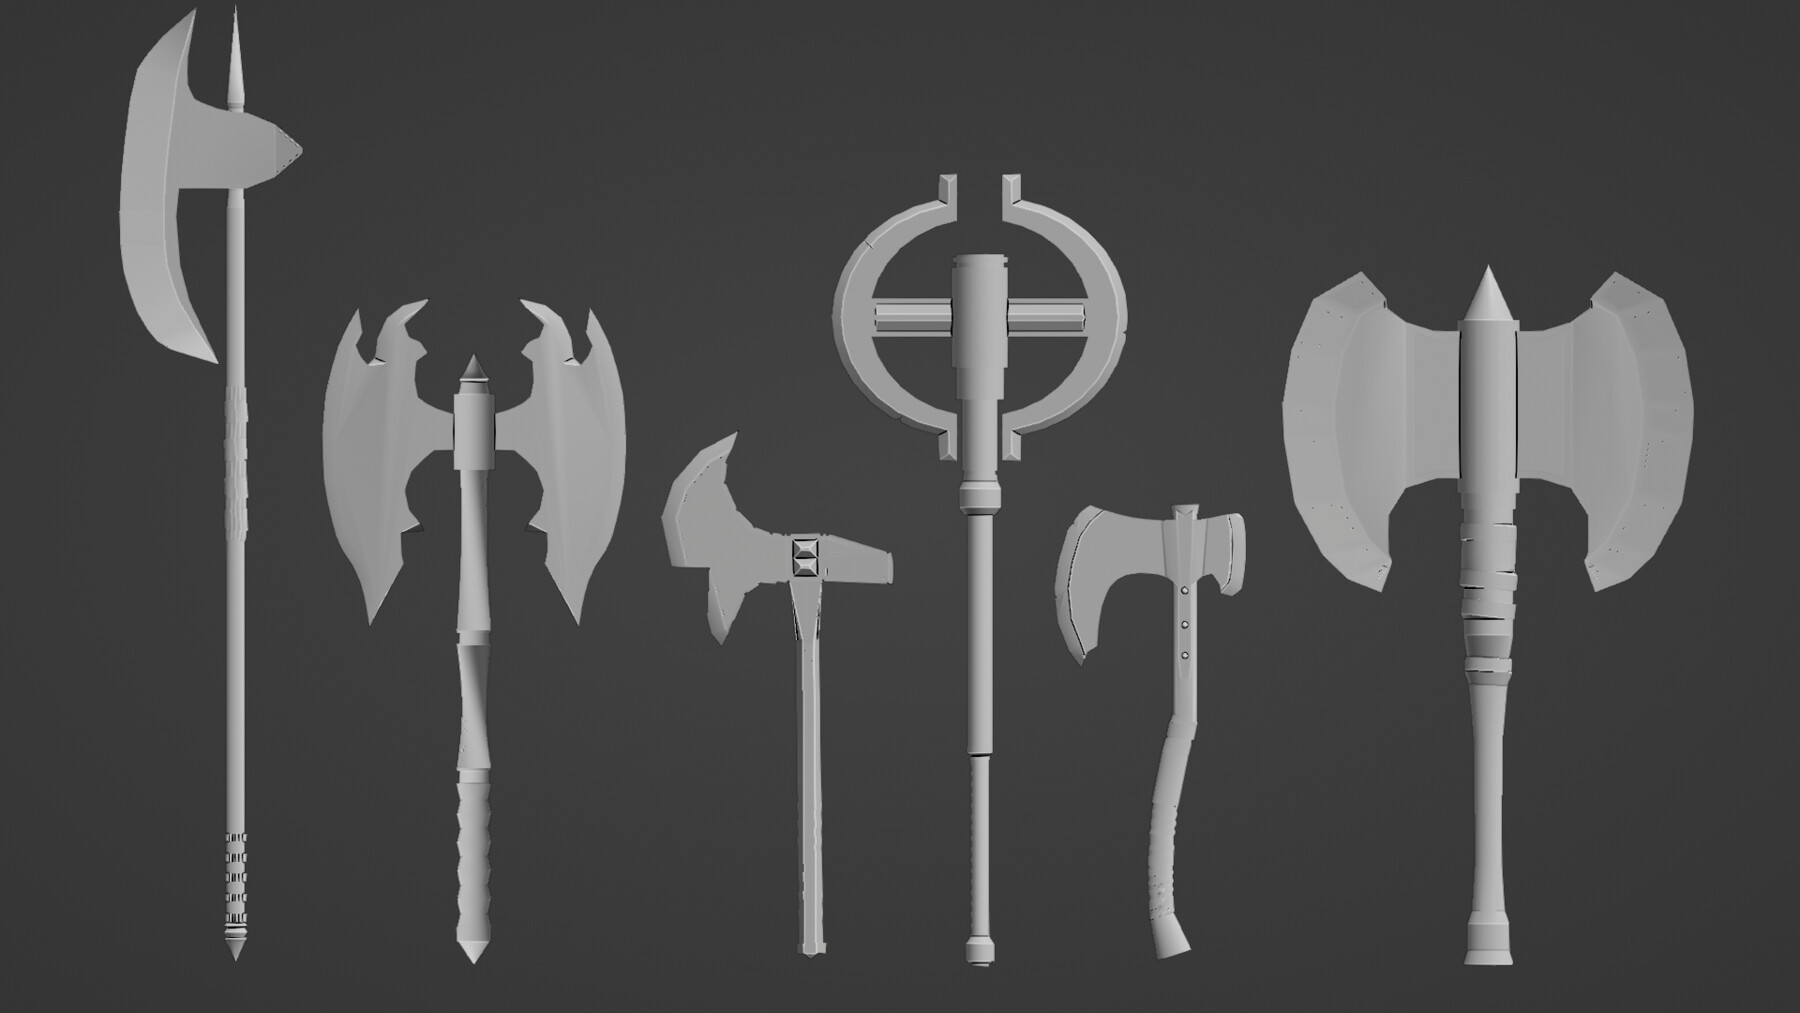 ArtStation - 10 AXES NON TEXTURED STILIZED PROPS | Game Assets